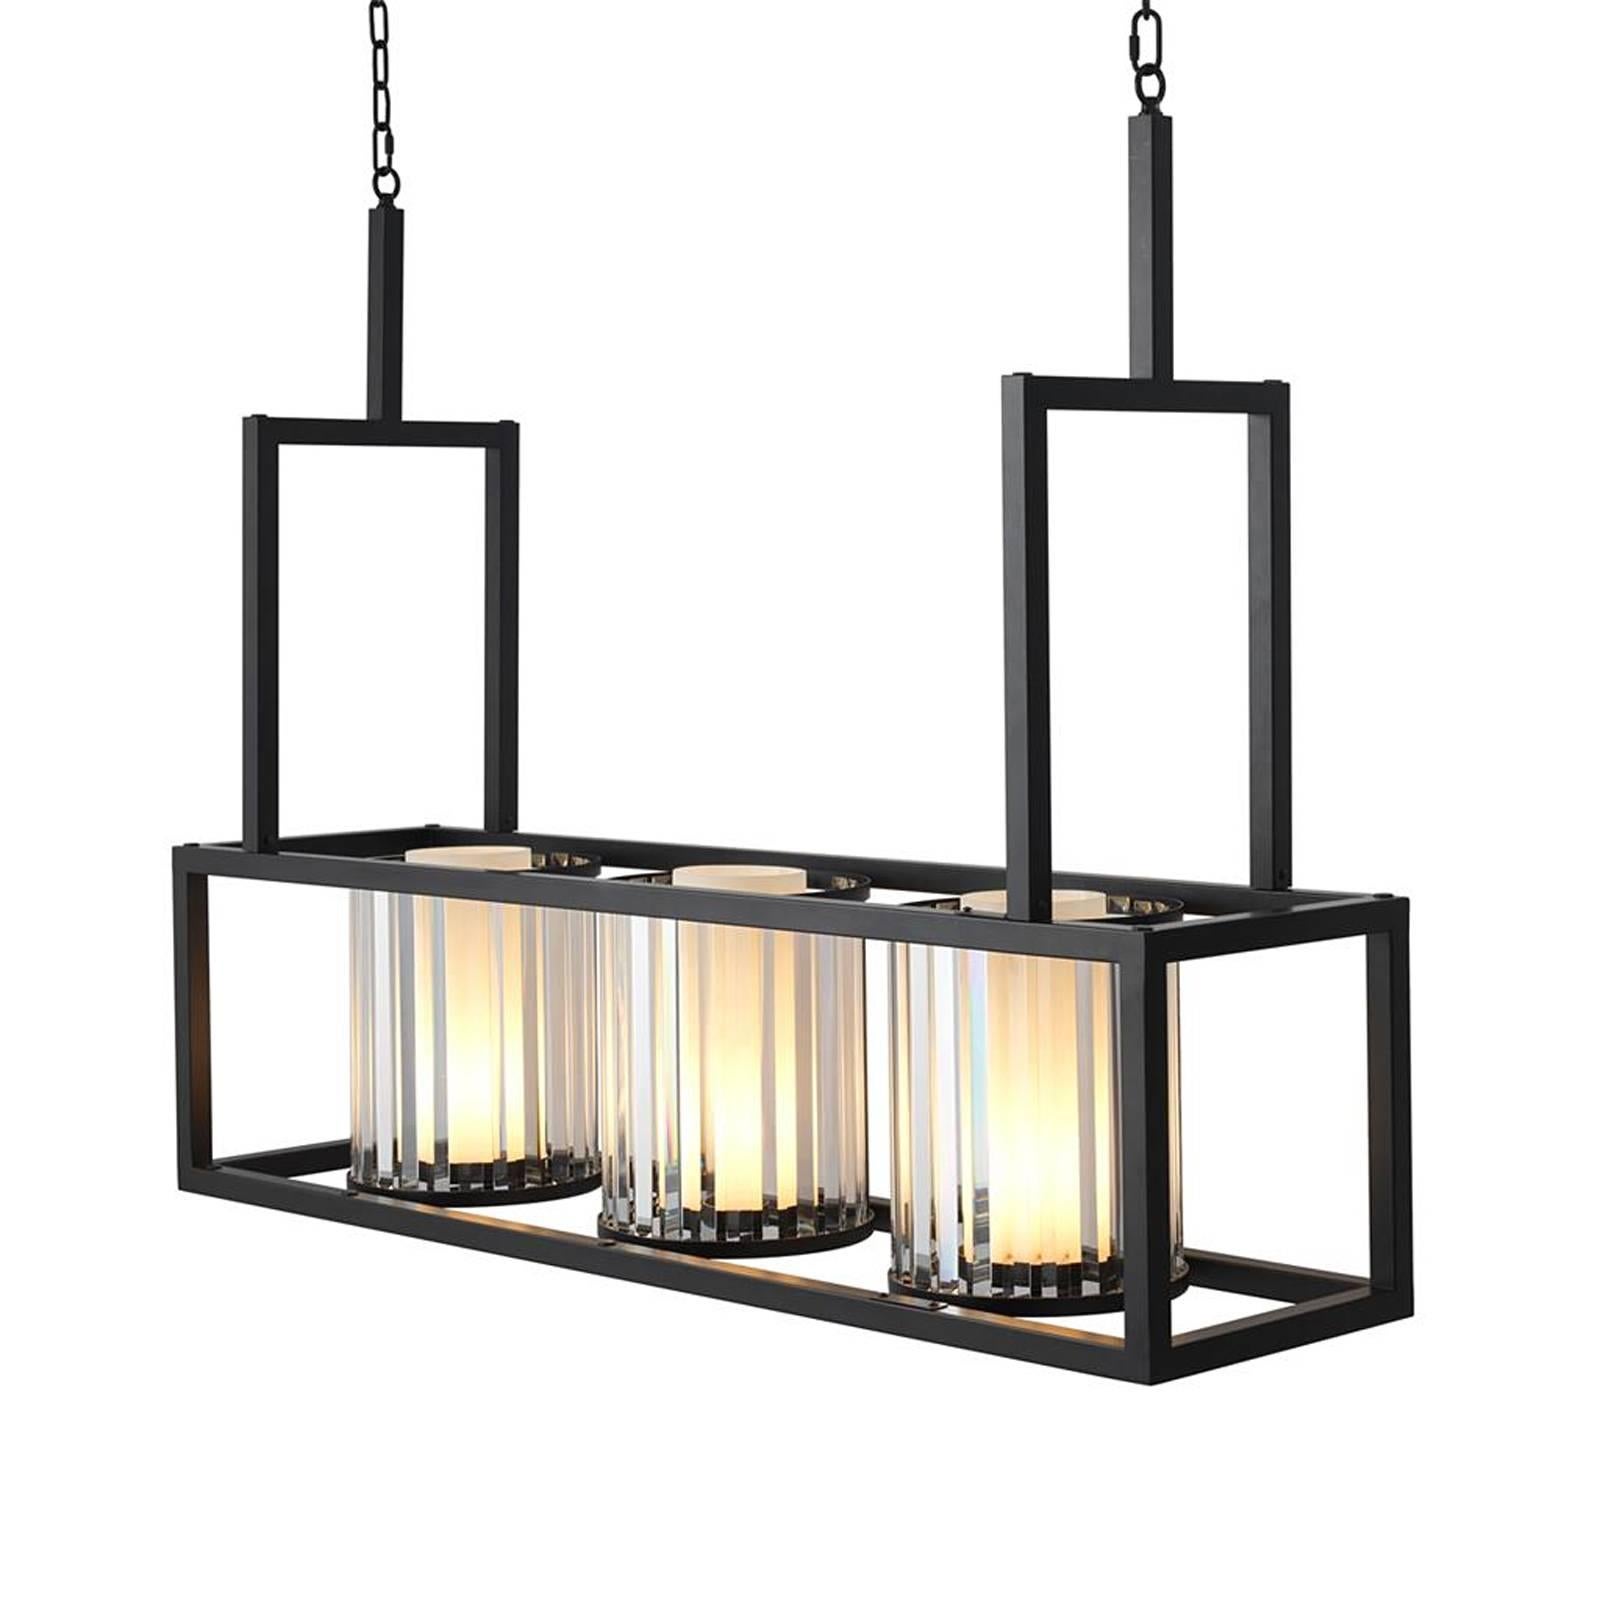 Chandelier Bellucci with iron structure in black finish,
crystal glass lamps with alabaster look. Three bulbs lamp
holder type E27, maximum 18 Watt. Adjustable chain:
150cm. Bulbs not included.
